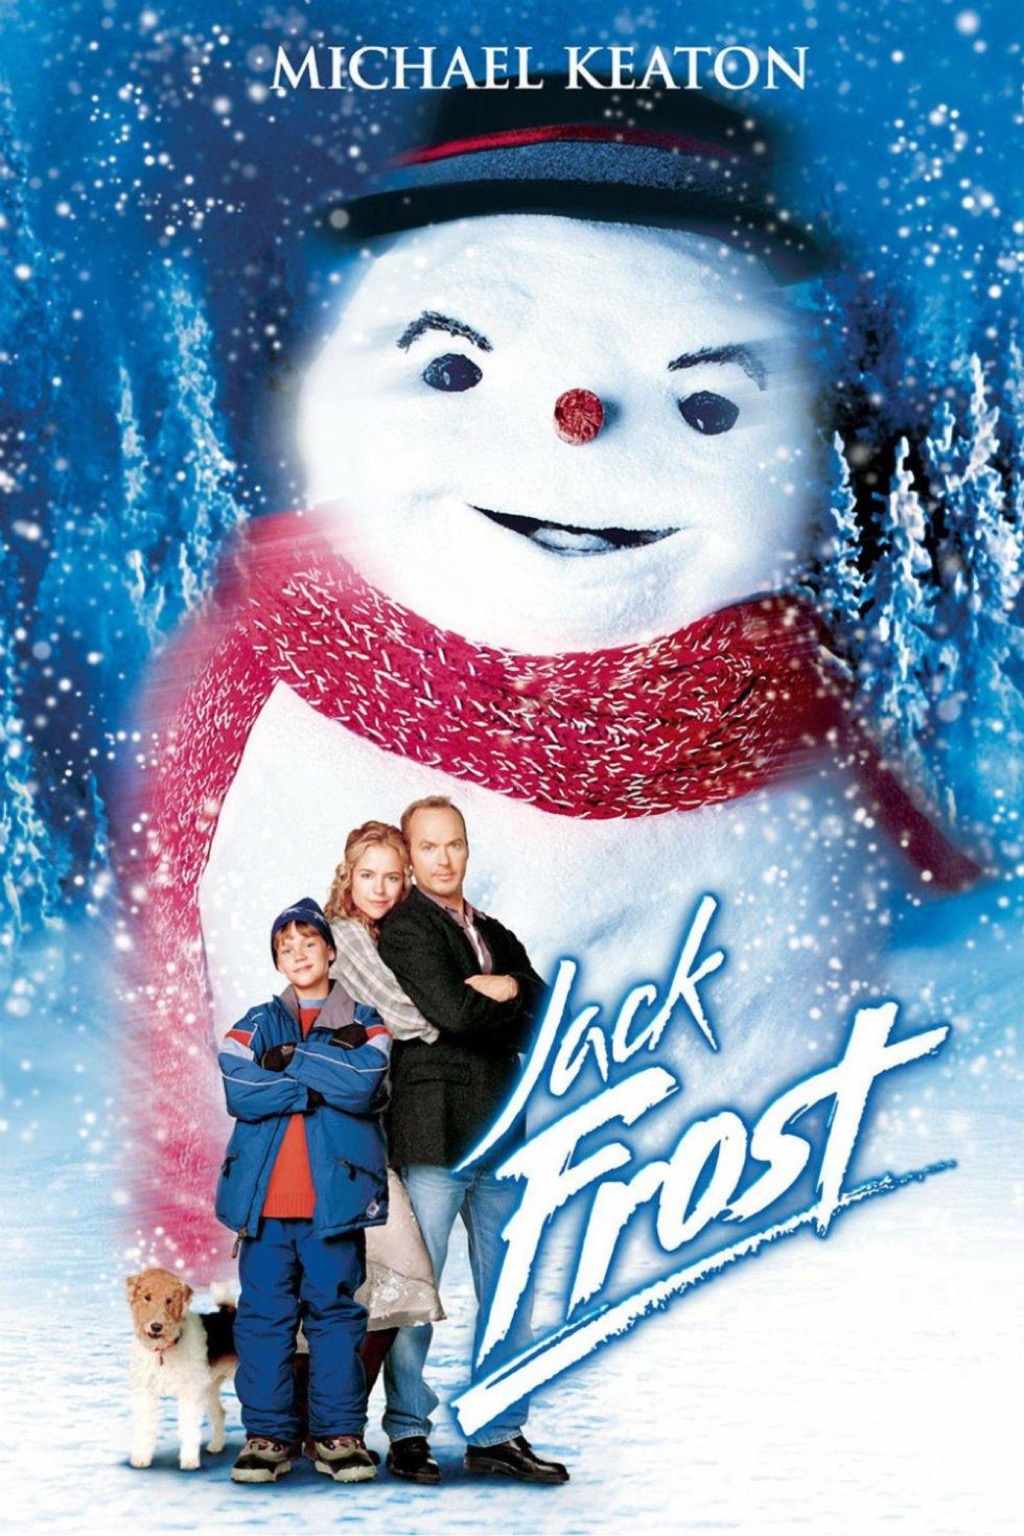 Jack Frost is a bad xmas movie